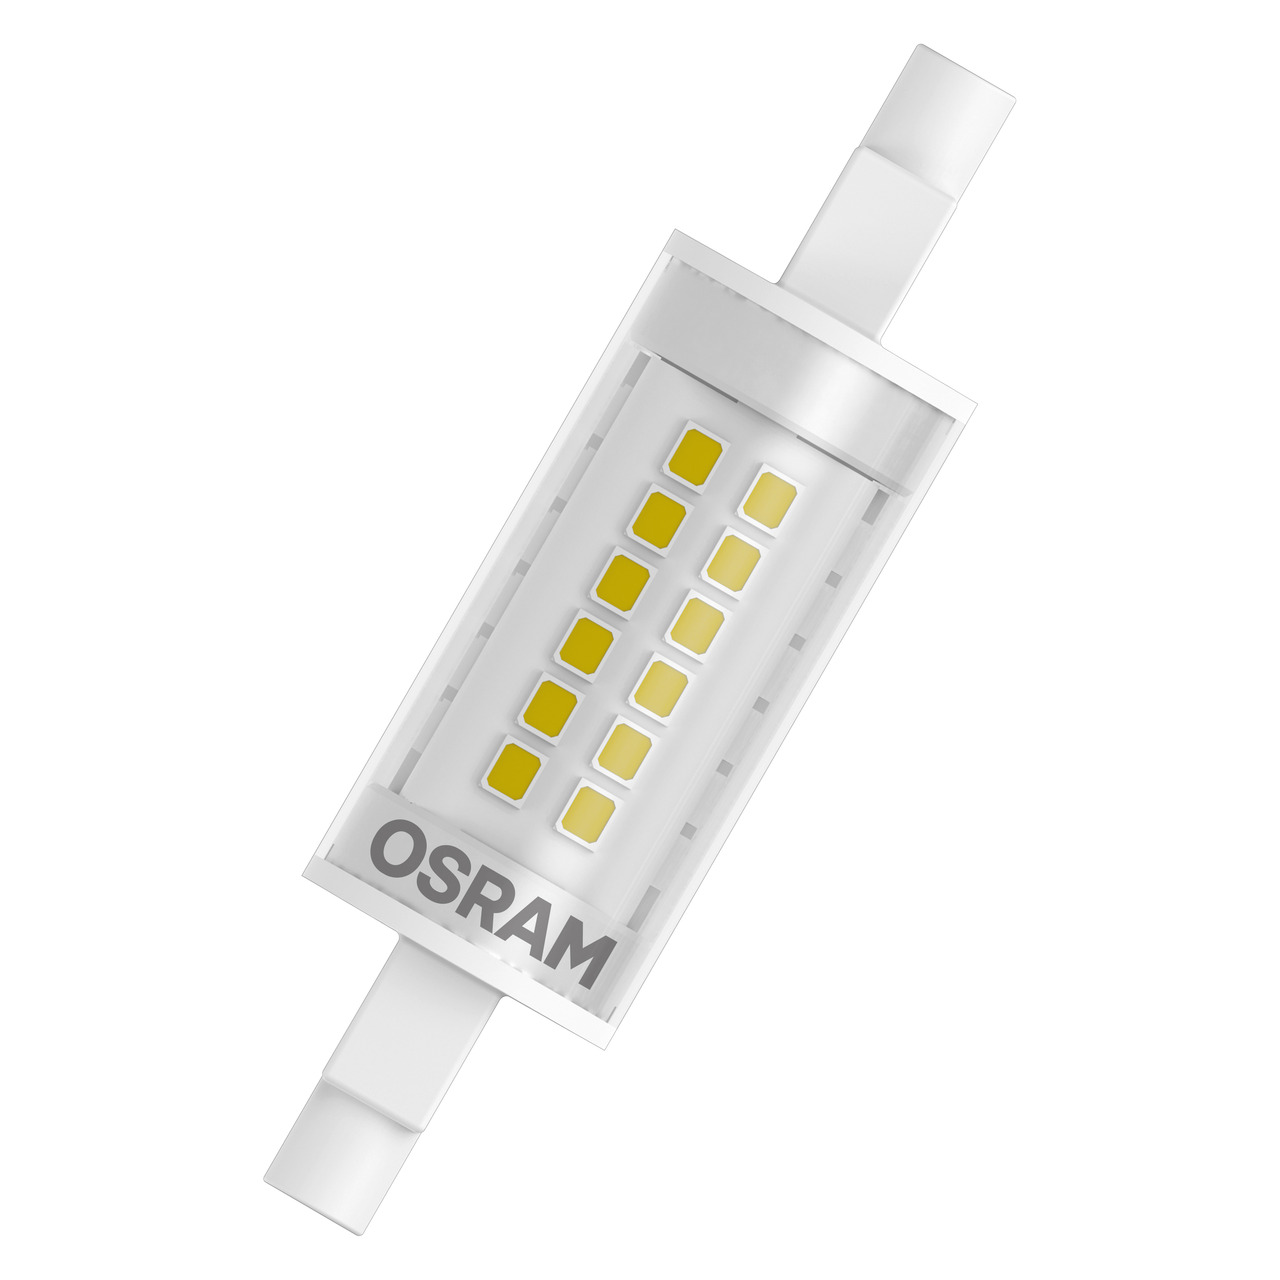 OSRAM 7-W-LED-Lampe T20- R7s- 806 lm- warmweiss unter Beleuchtung